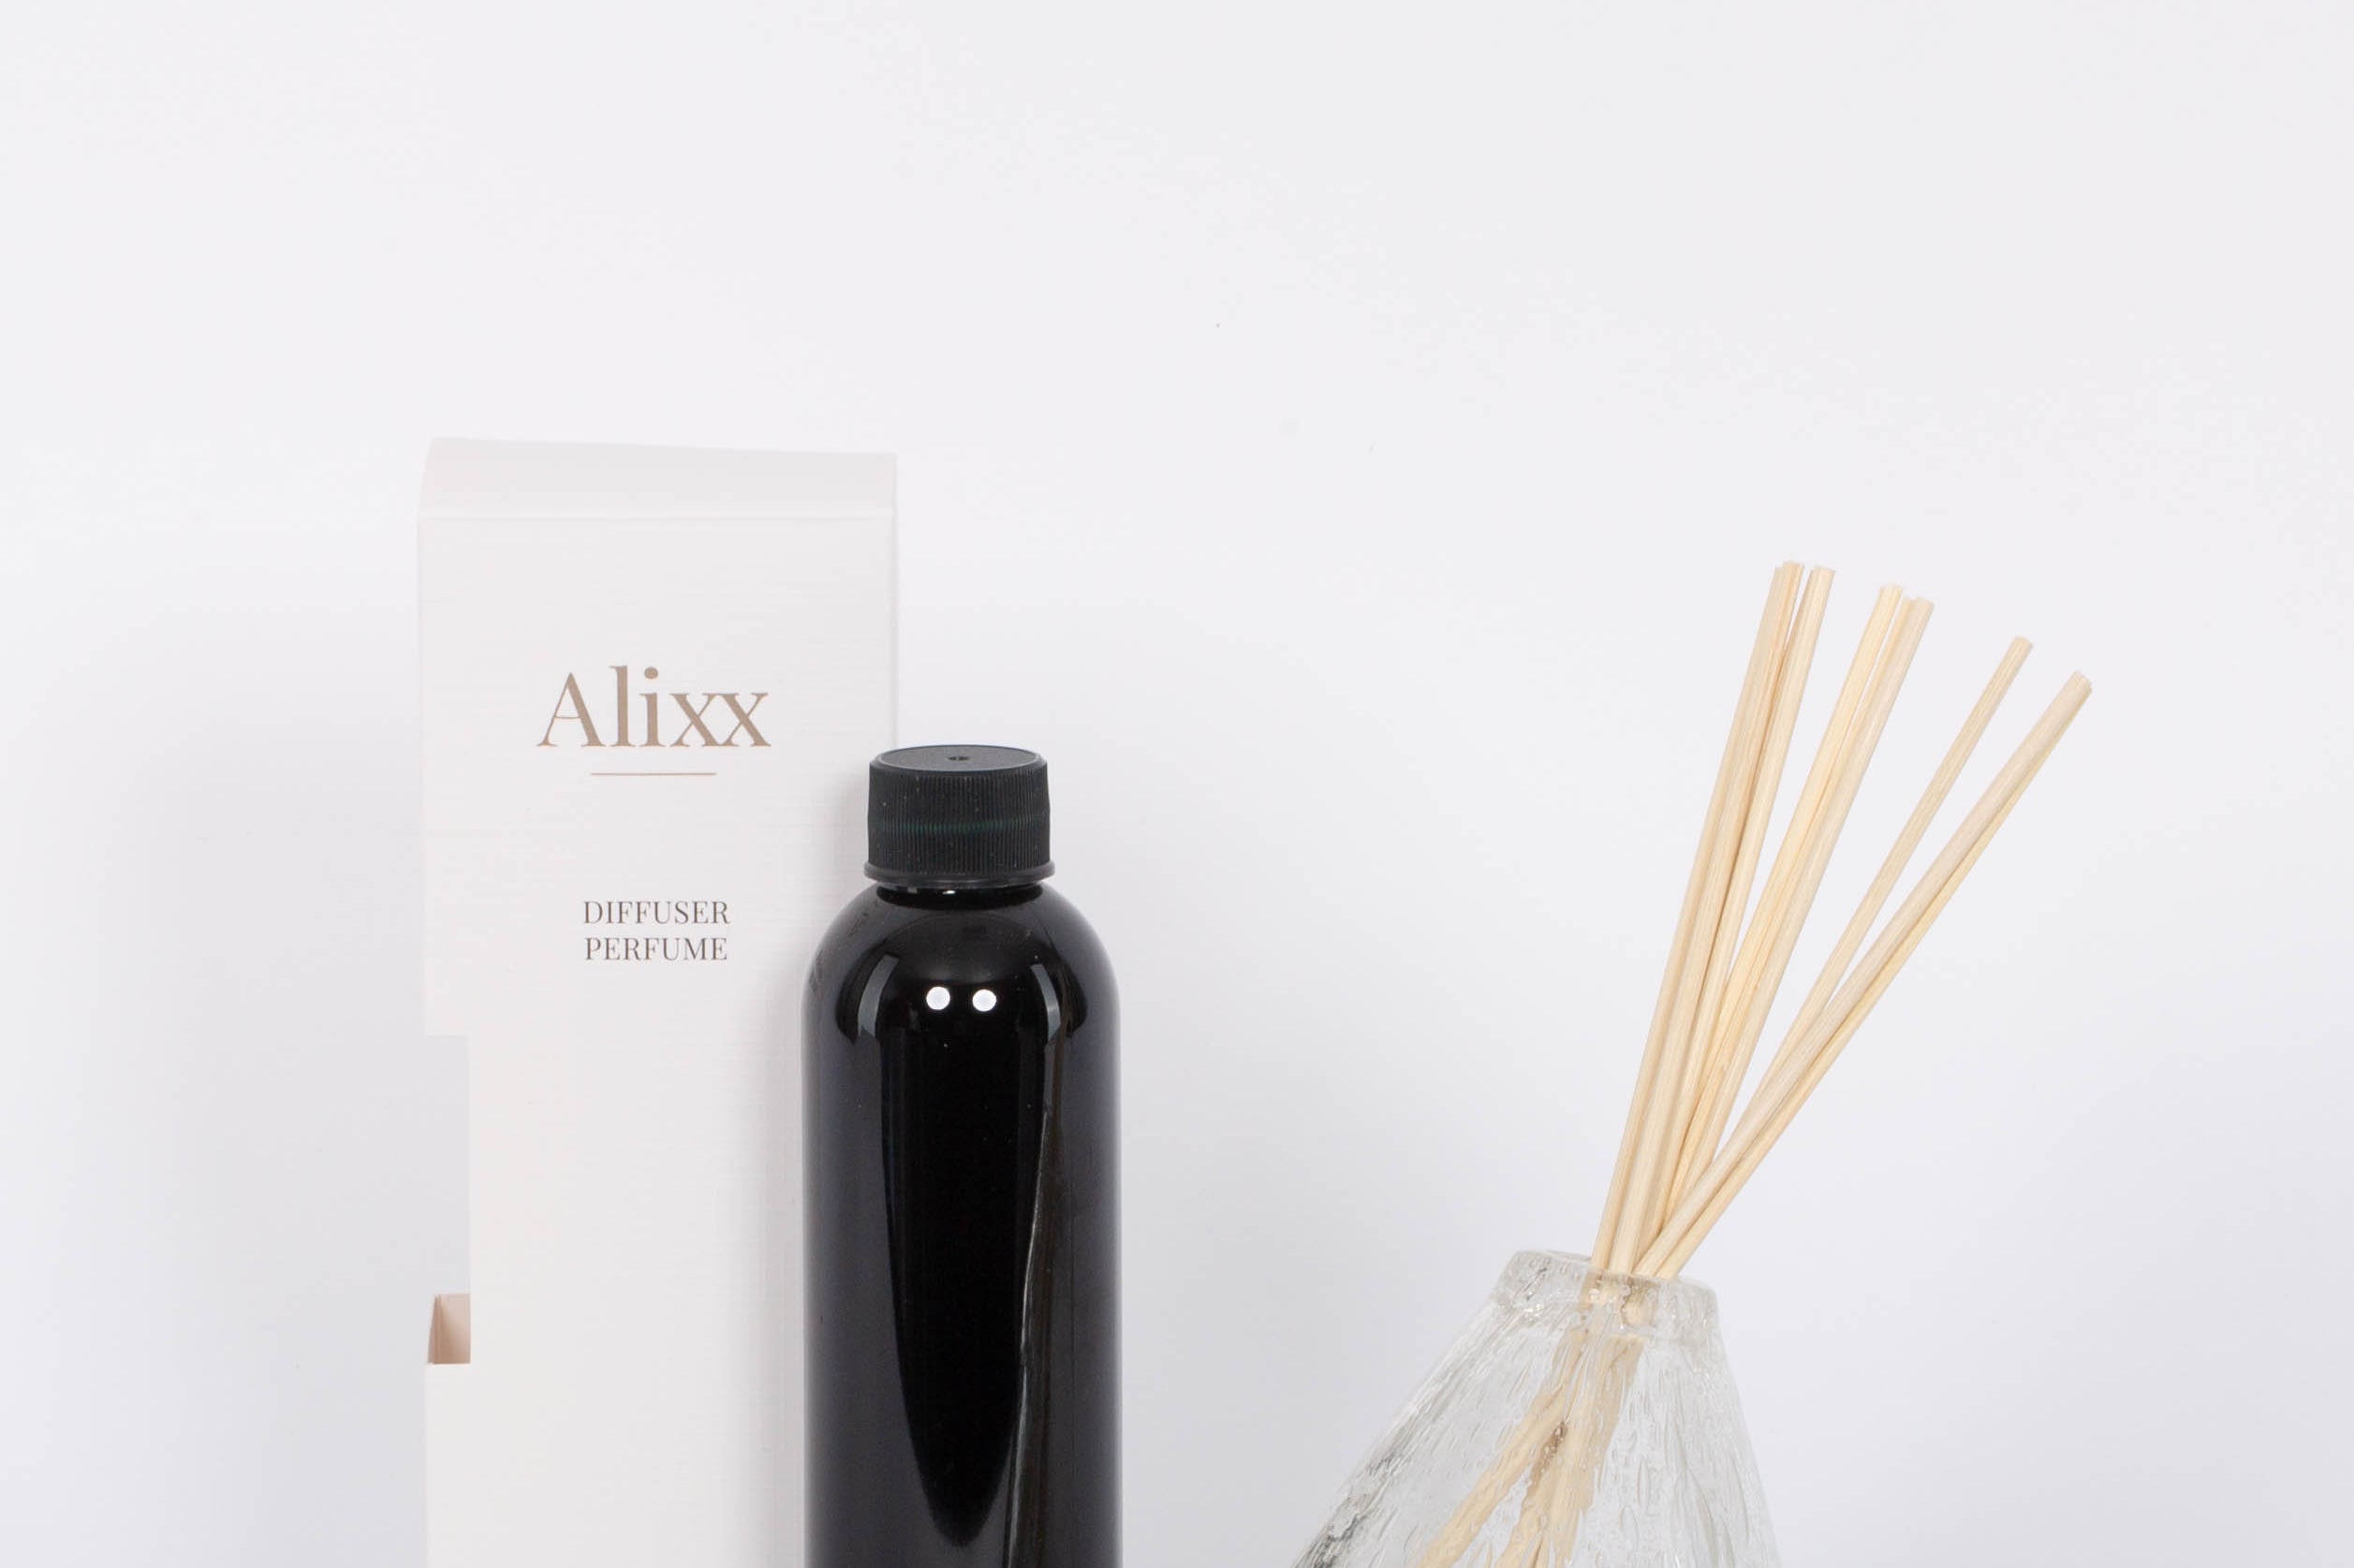 Heure du Thé Diffuser Set by Alixx with vase, scent sticks, and refill bottle. White background. 